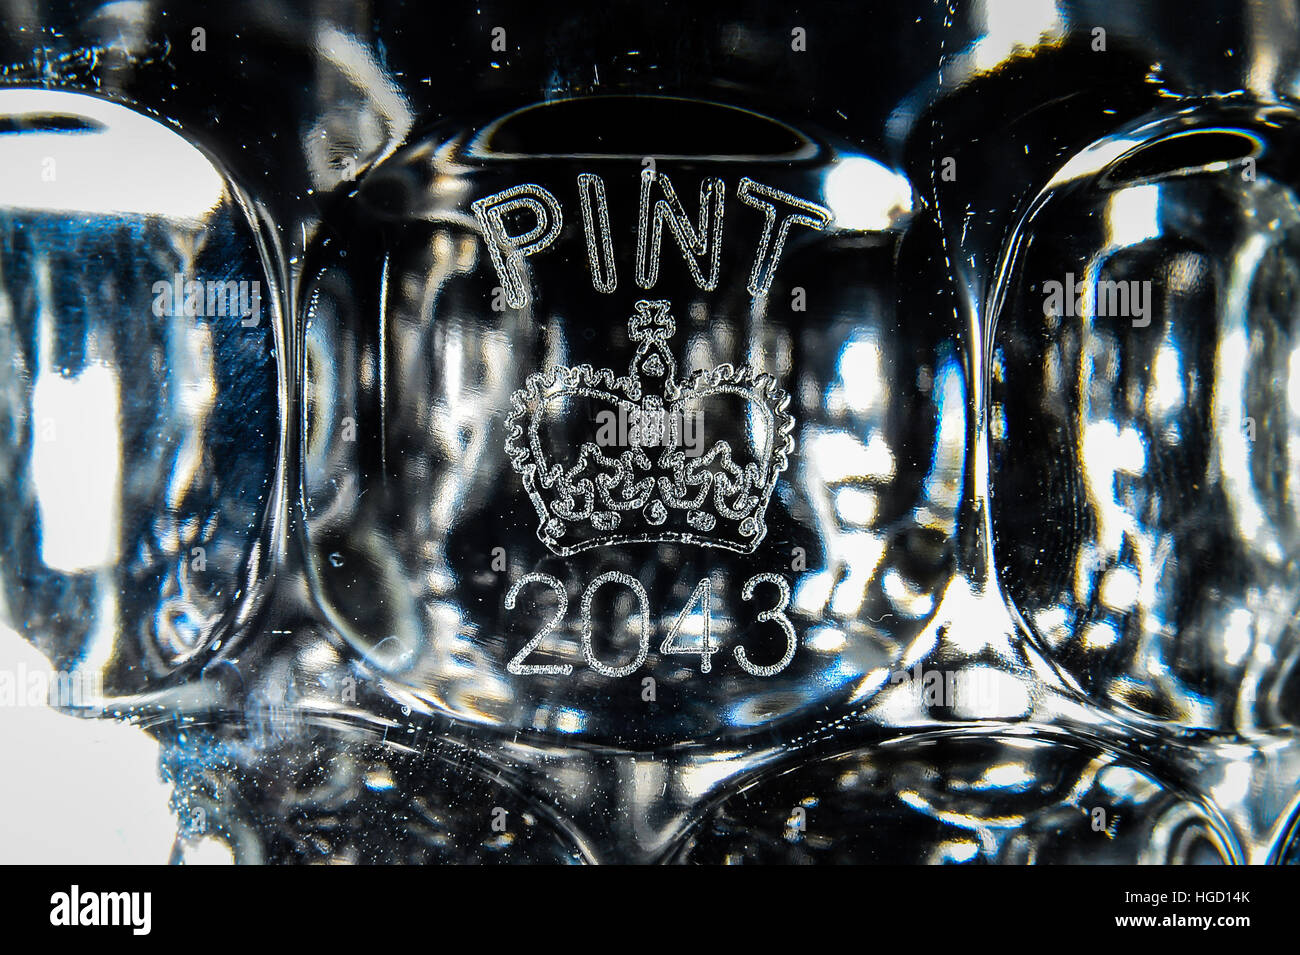 A dimpled pint glass etched with the Crown stamp rather than the European CE marking, as Ukip MEP Bill Etheridge has backed calls for the return of traditional Crown stamps on Britain&Otilde;s pint glasses - a decade after they began to disappear in favour of an EU-wide &Ograve;European Conformity&Oacute; mark. Stock Photo